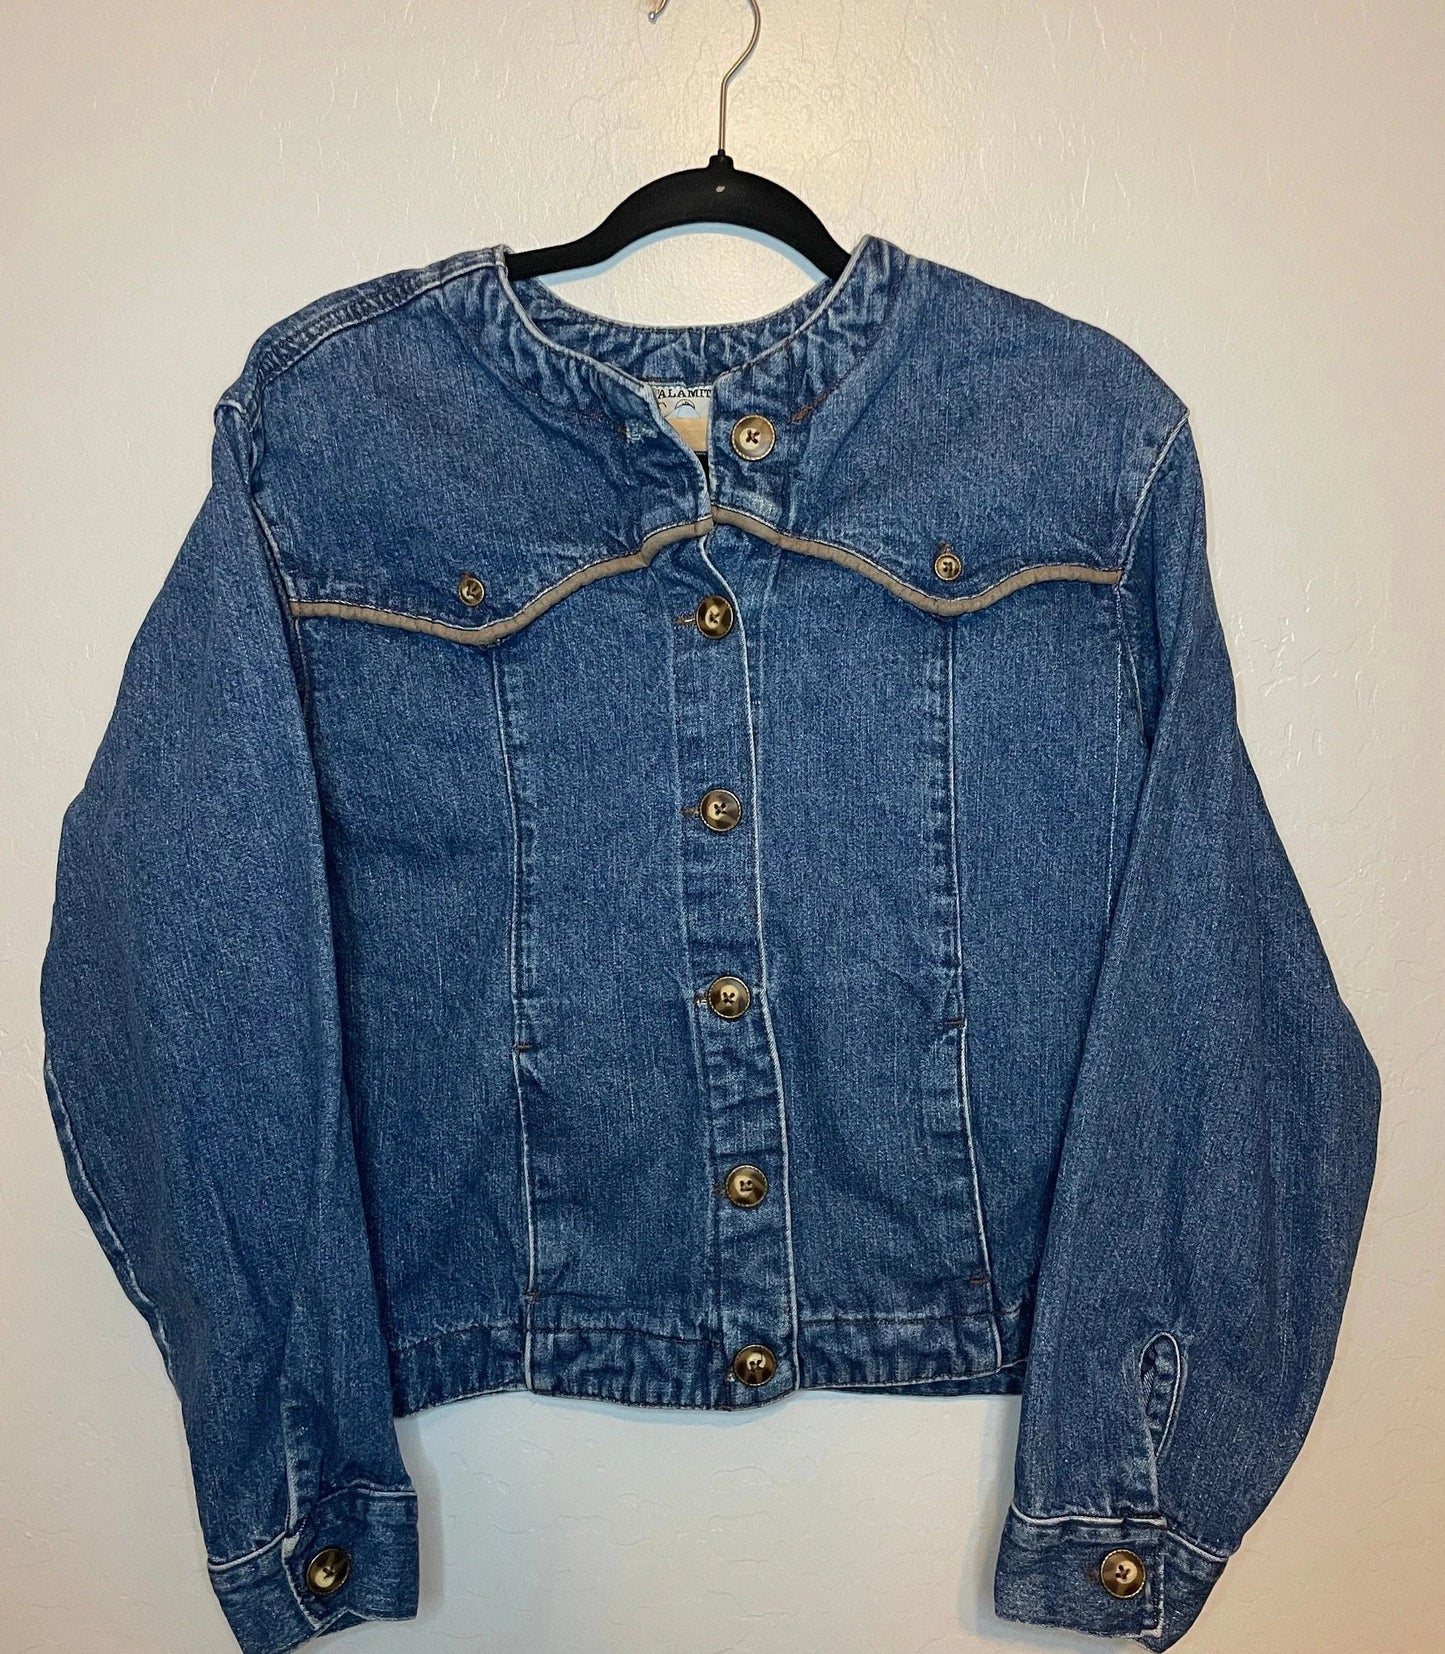 90s Denim Jacket with Suede Lining